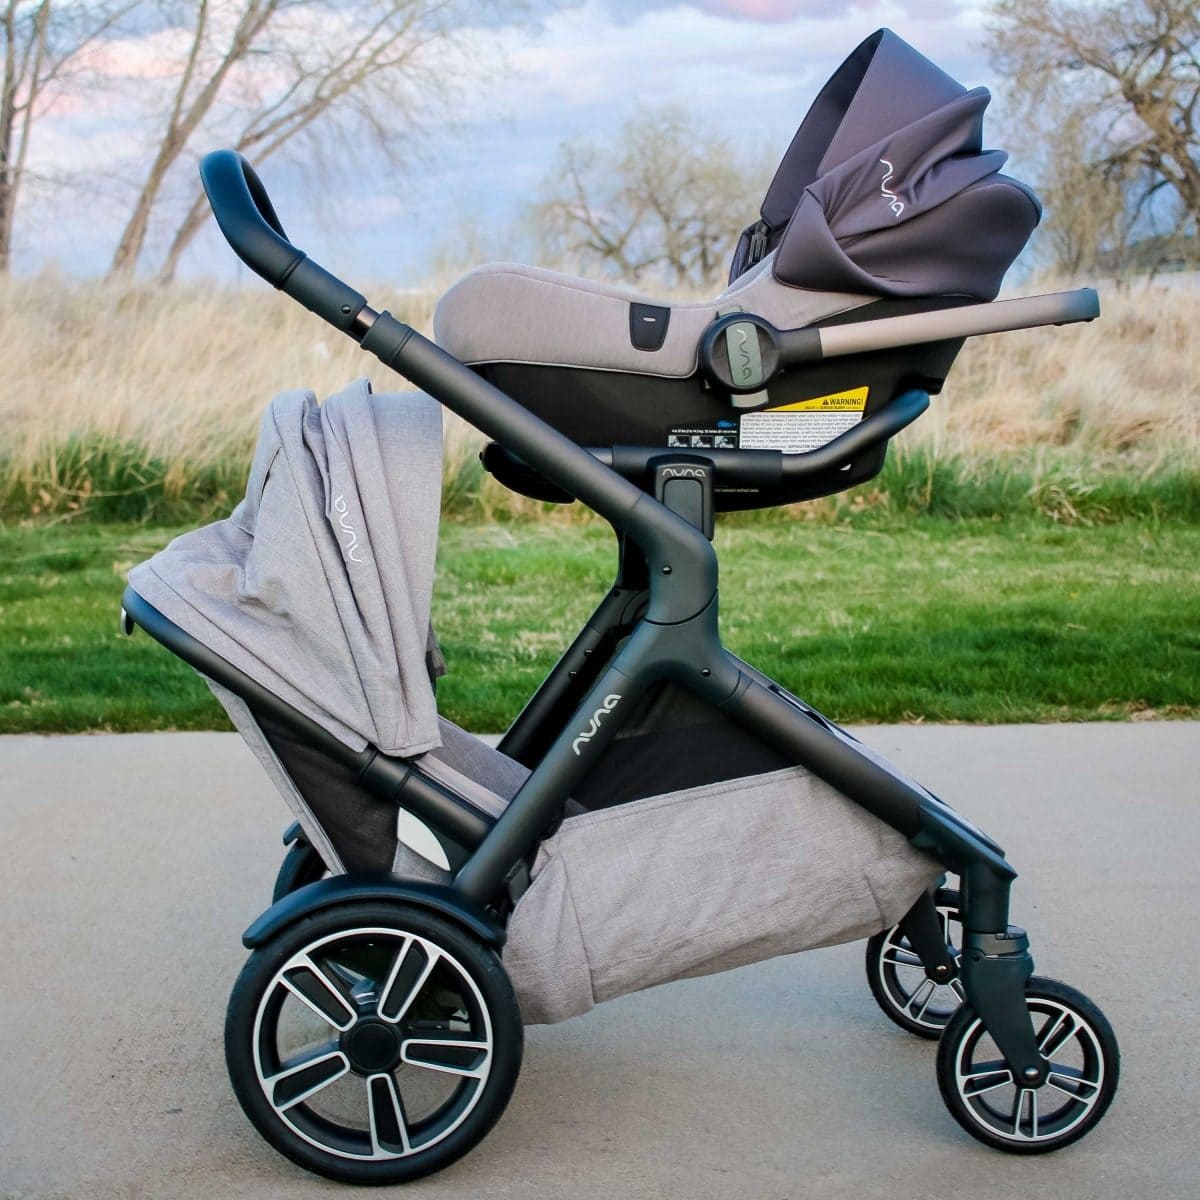 12 Products That Belong On The Best Baby Registry For Millennial Moms